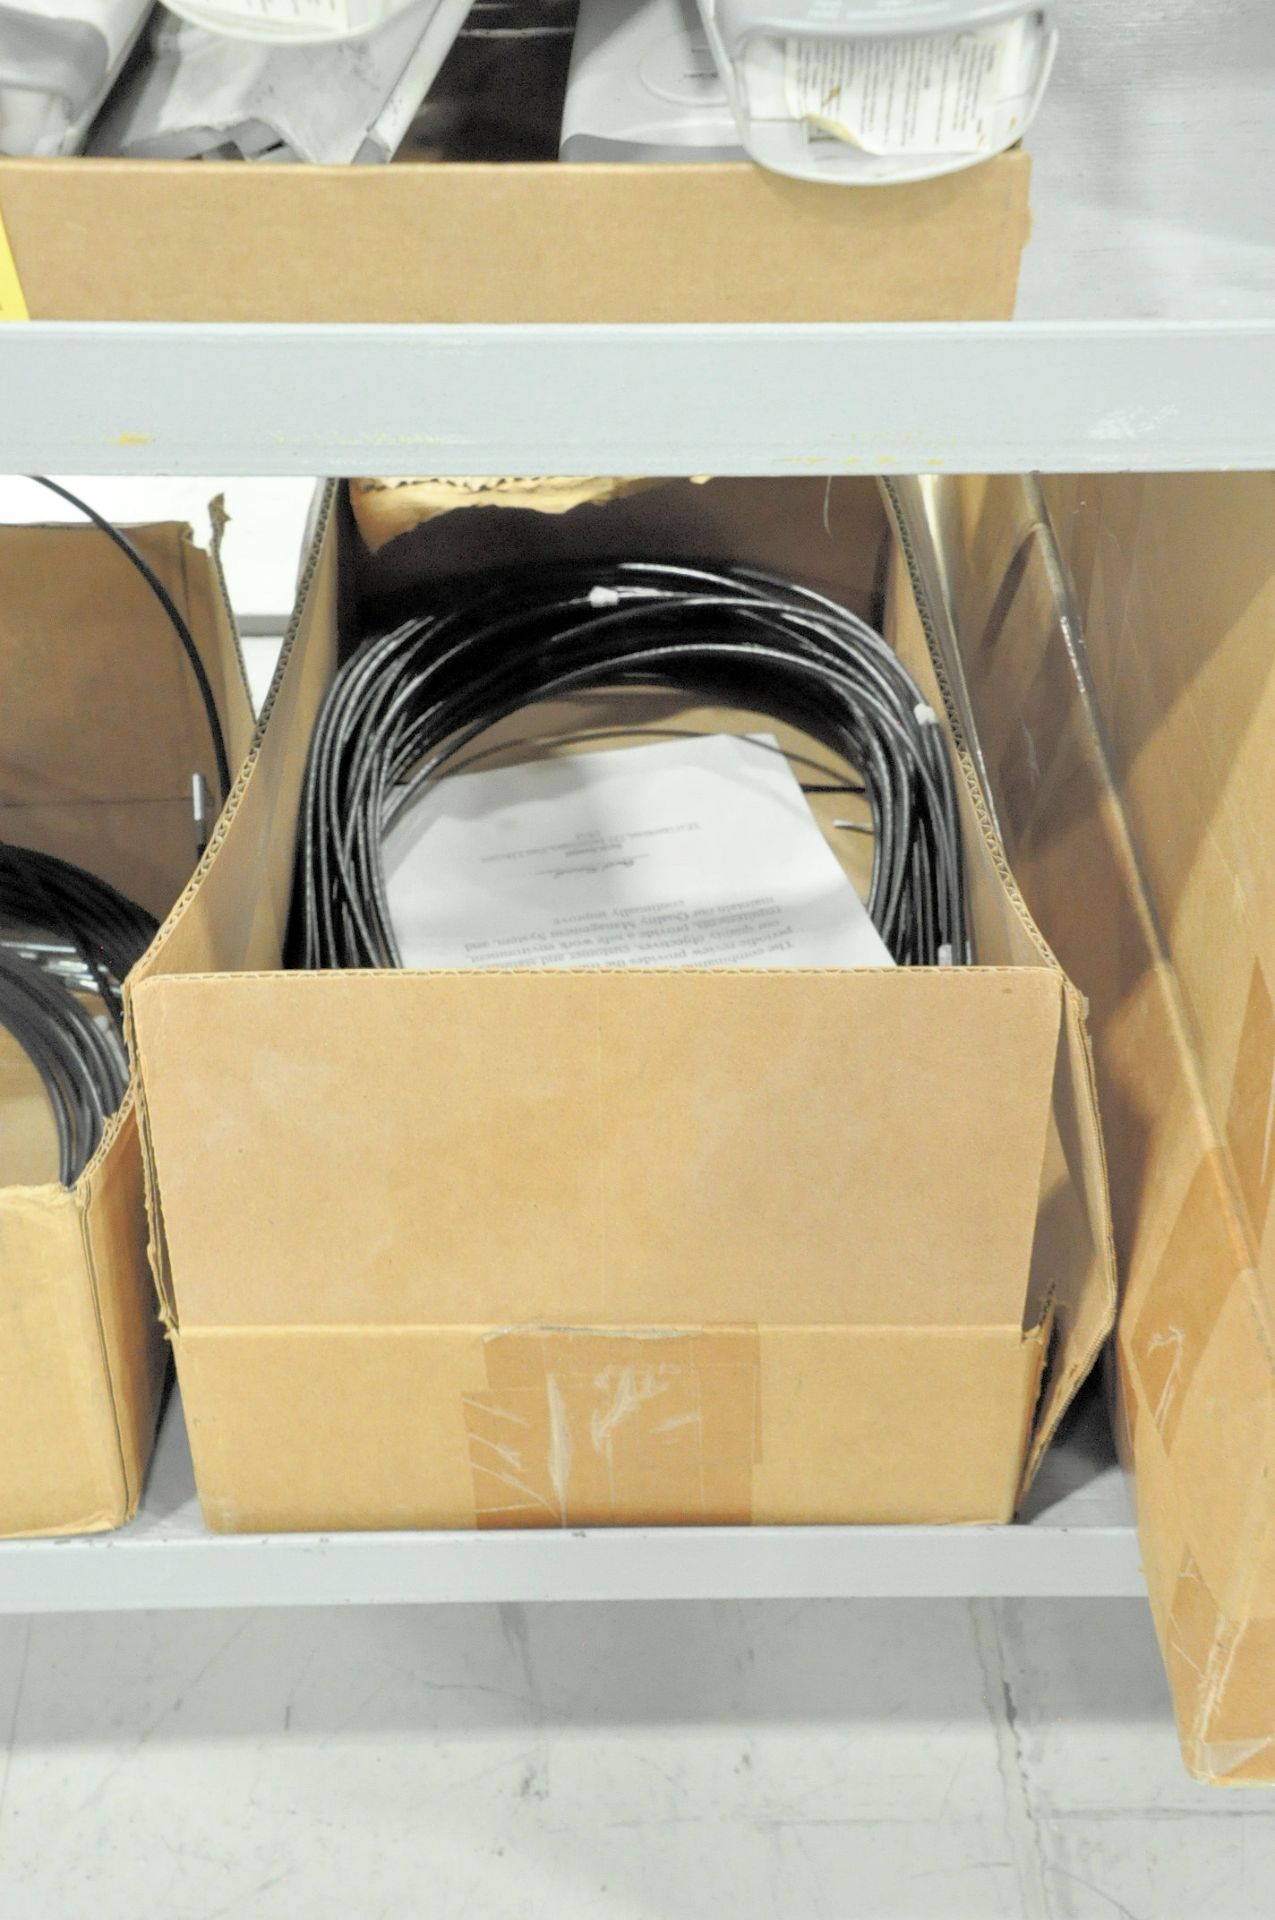 Lot-Various Cables and Split Rubber Seals in (6) Boxes on (1) Shelf - Image 4 of 4